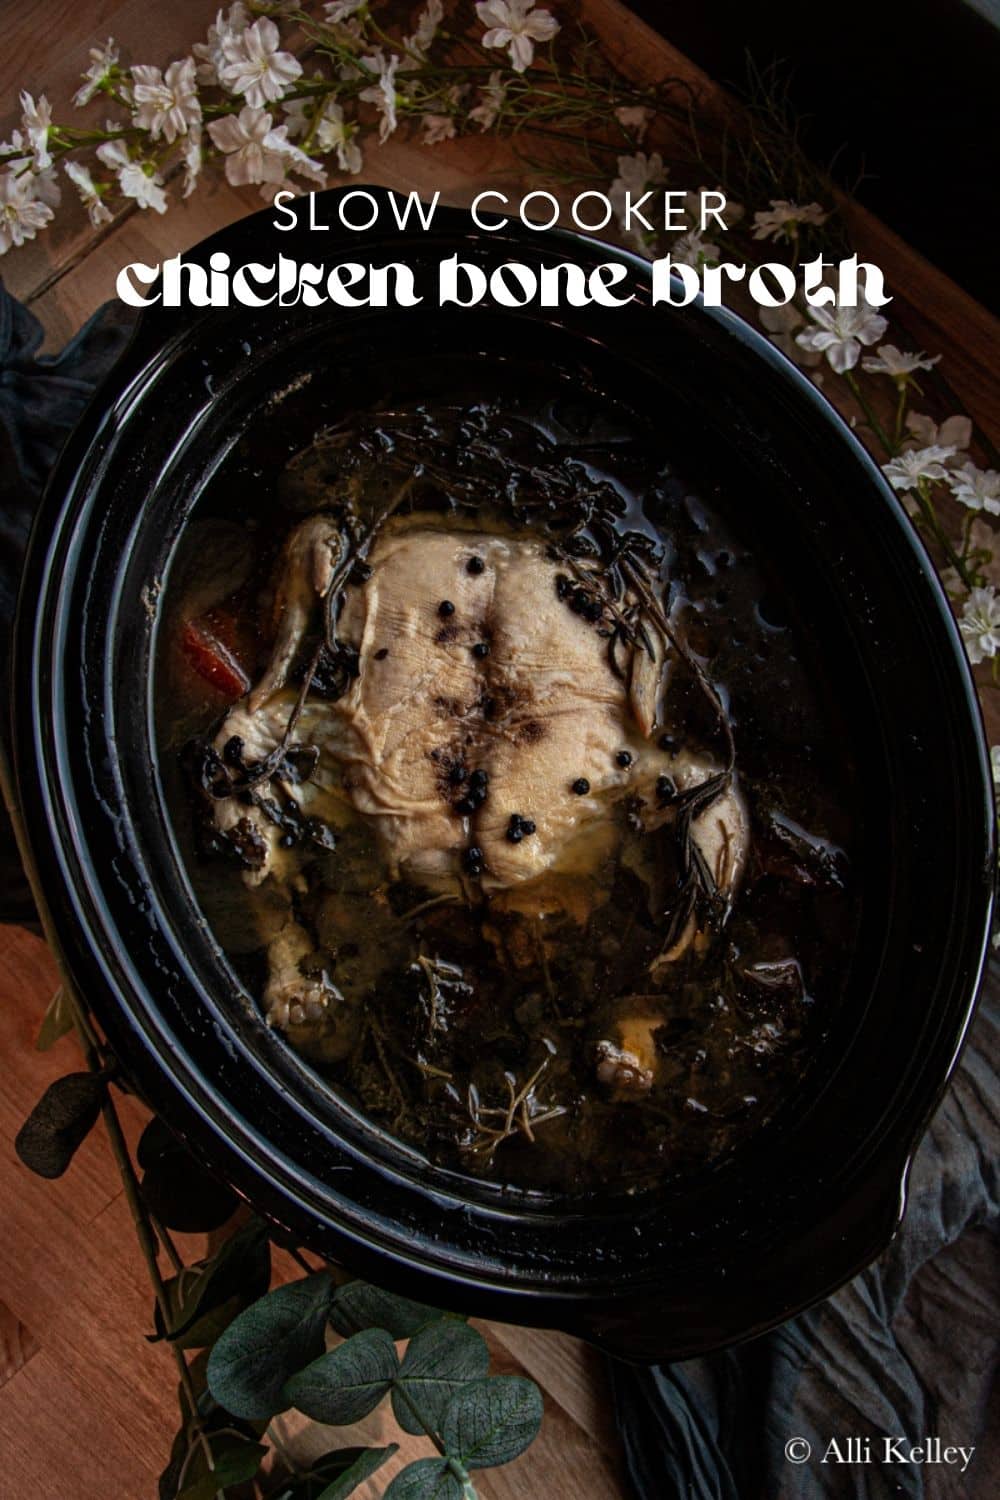 Chicken bone broth is so easy to make in a slow cooker and tastes much better than store-bought! You can use this chicken bone broth recipe as the base for many dishes, such as soups, stews, casseroles, and sauces. Not only that – chicken bone broth is rich in vitamins and minerals, making it incredibly nutritious and beneficial for your health!